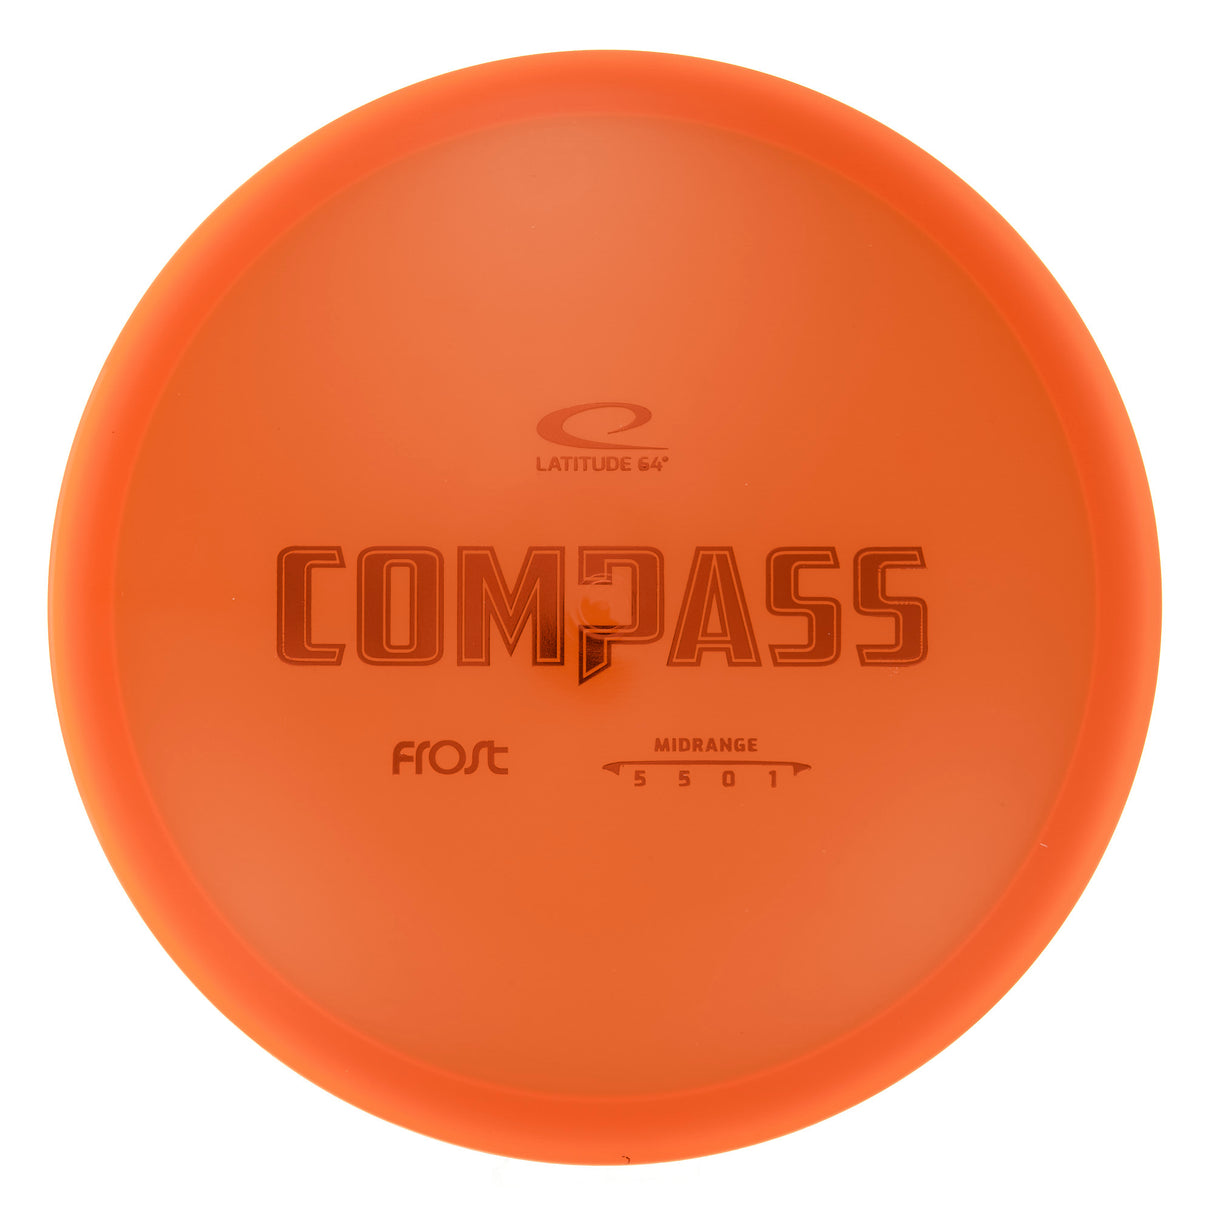 Latitude 64 Compass - Frost 178g | Style 0003